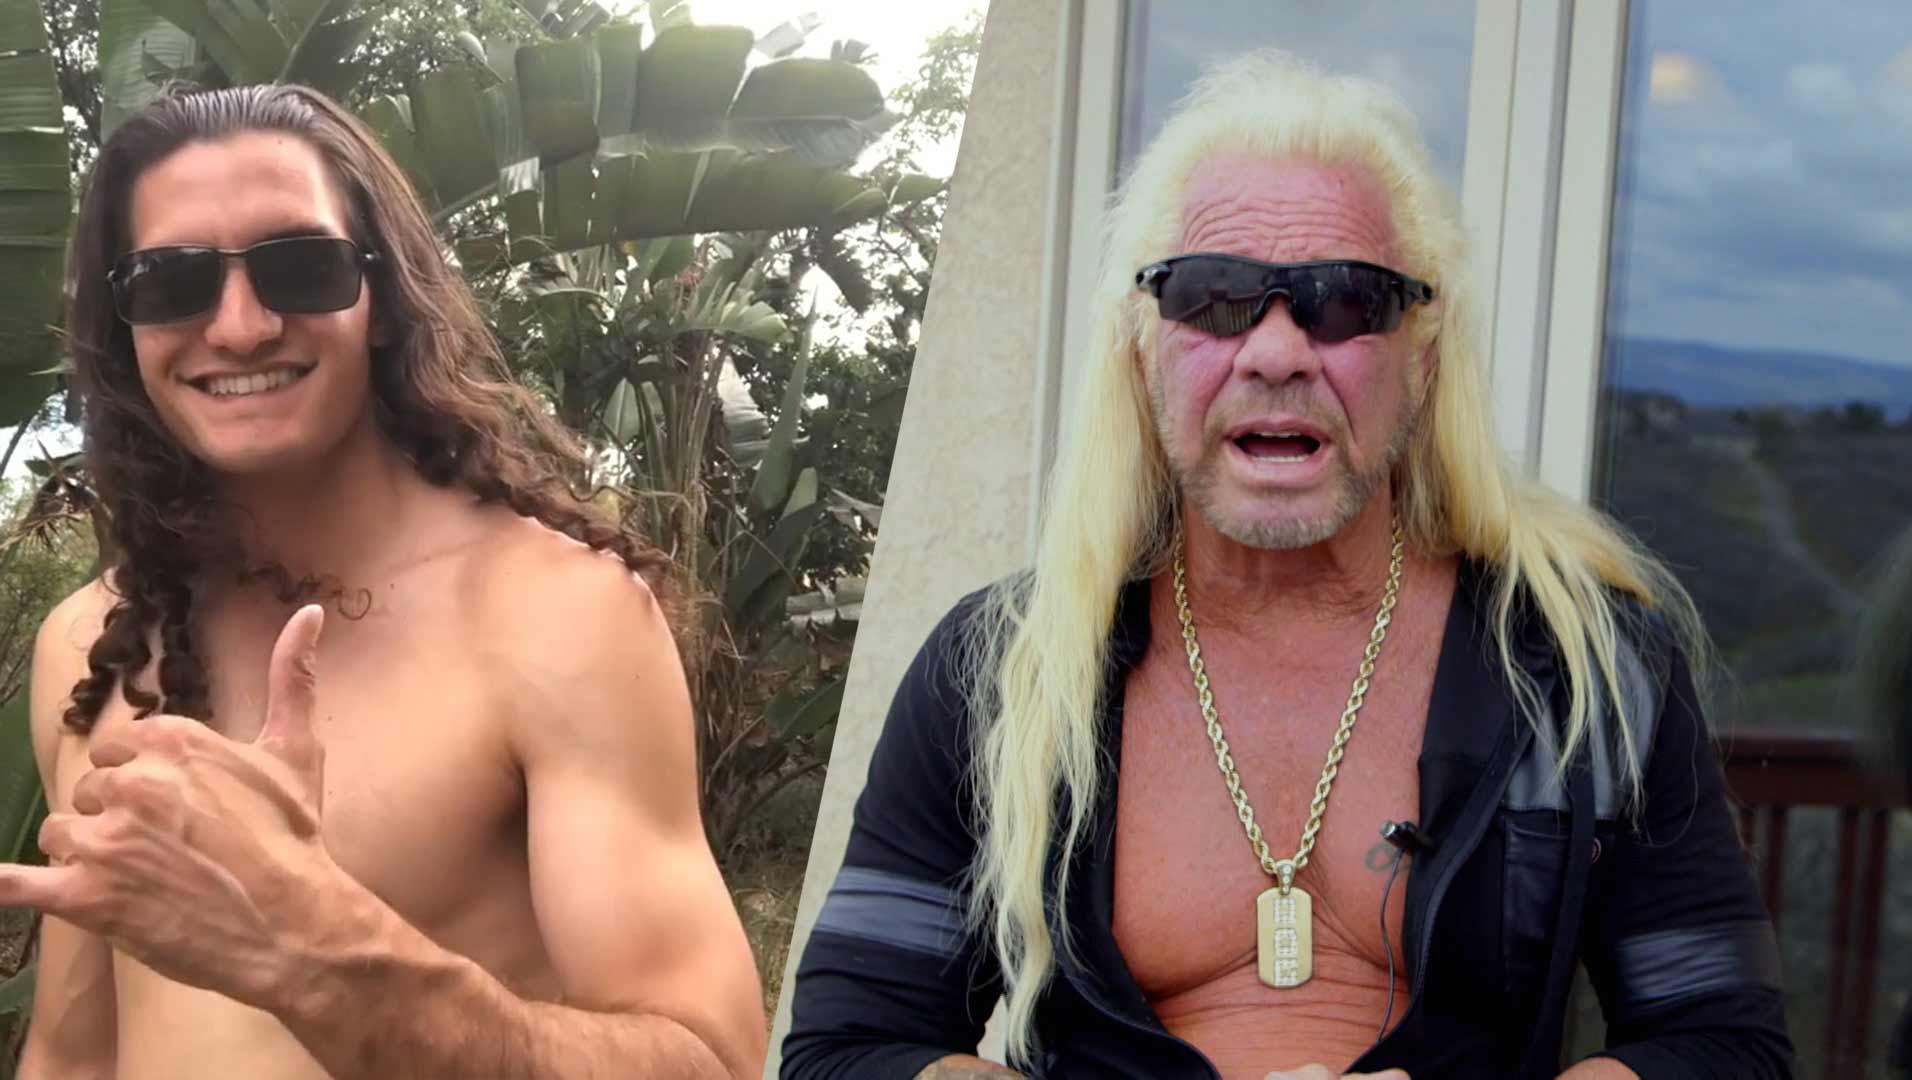 Dog The Bounty Hunter’s Grandson Goes Shirtless To Promote ‘Dog’s Most Wanted’